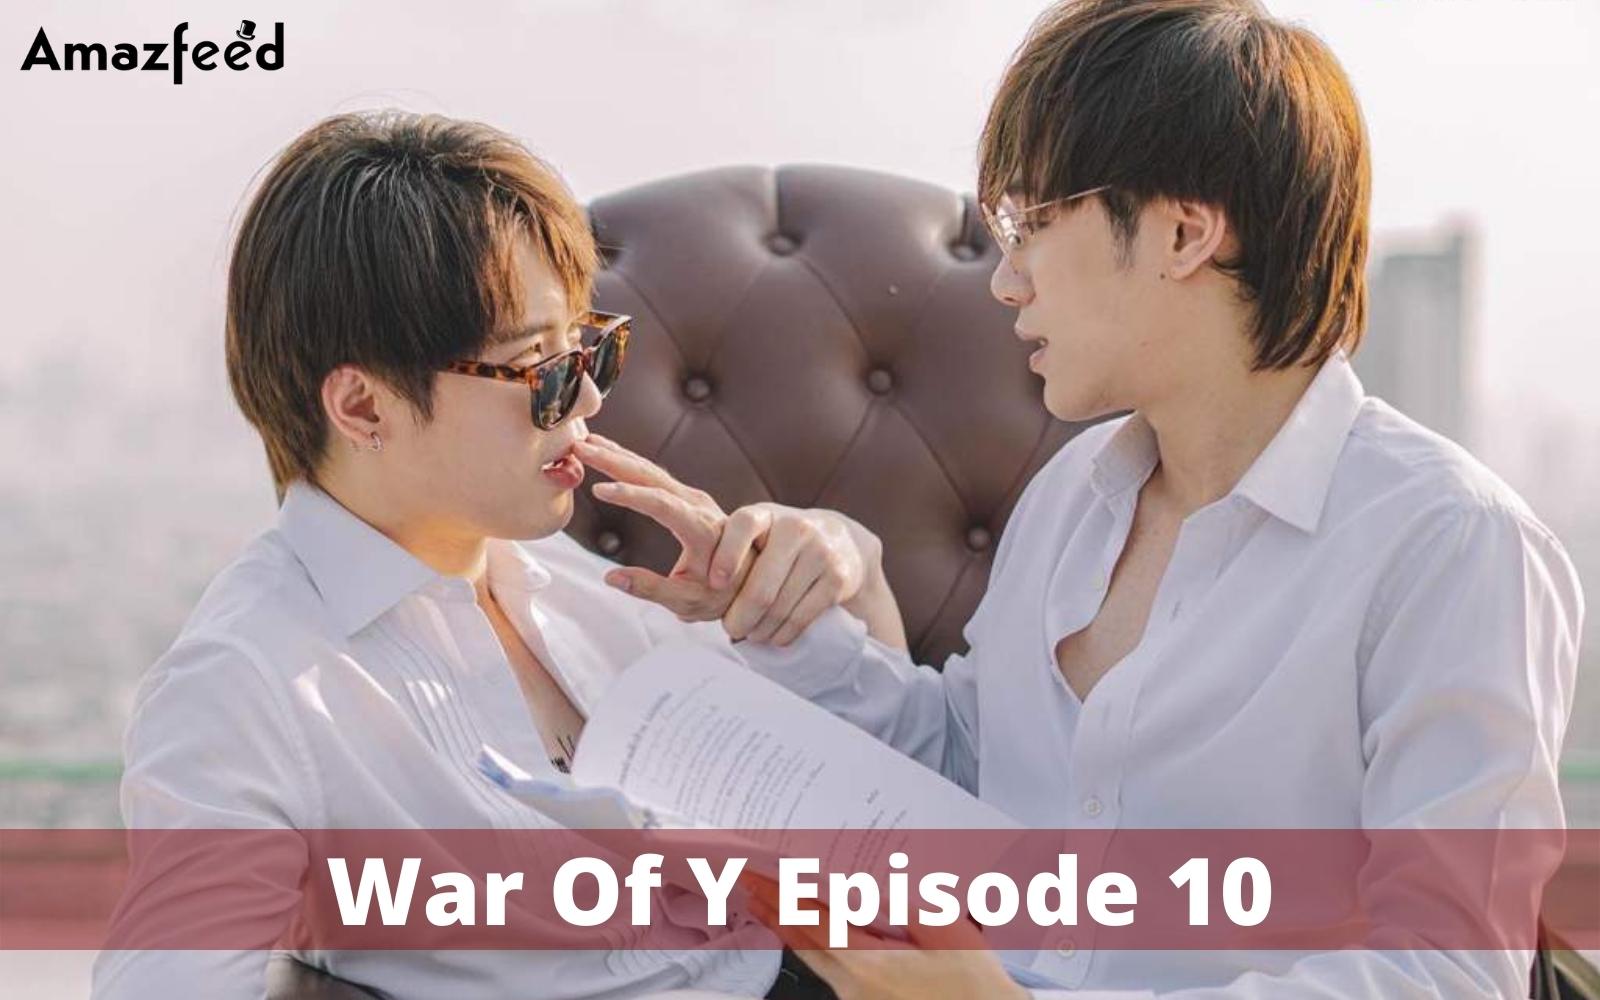 War of Y Episode 10 Coming Out? Release Date & Time, Trailer, Cast, Recap and Spoiler Everything You Need to Know